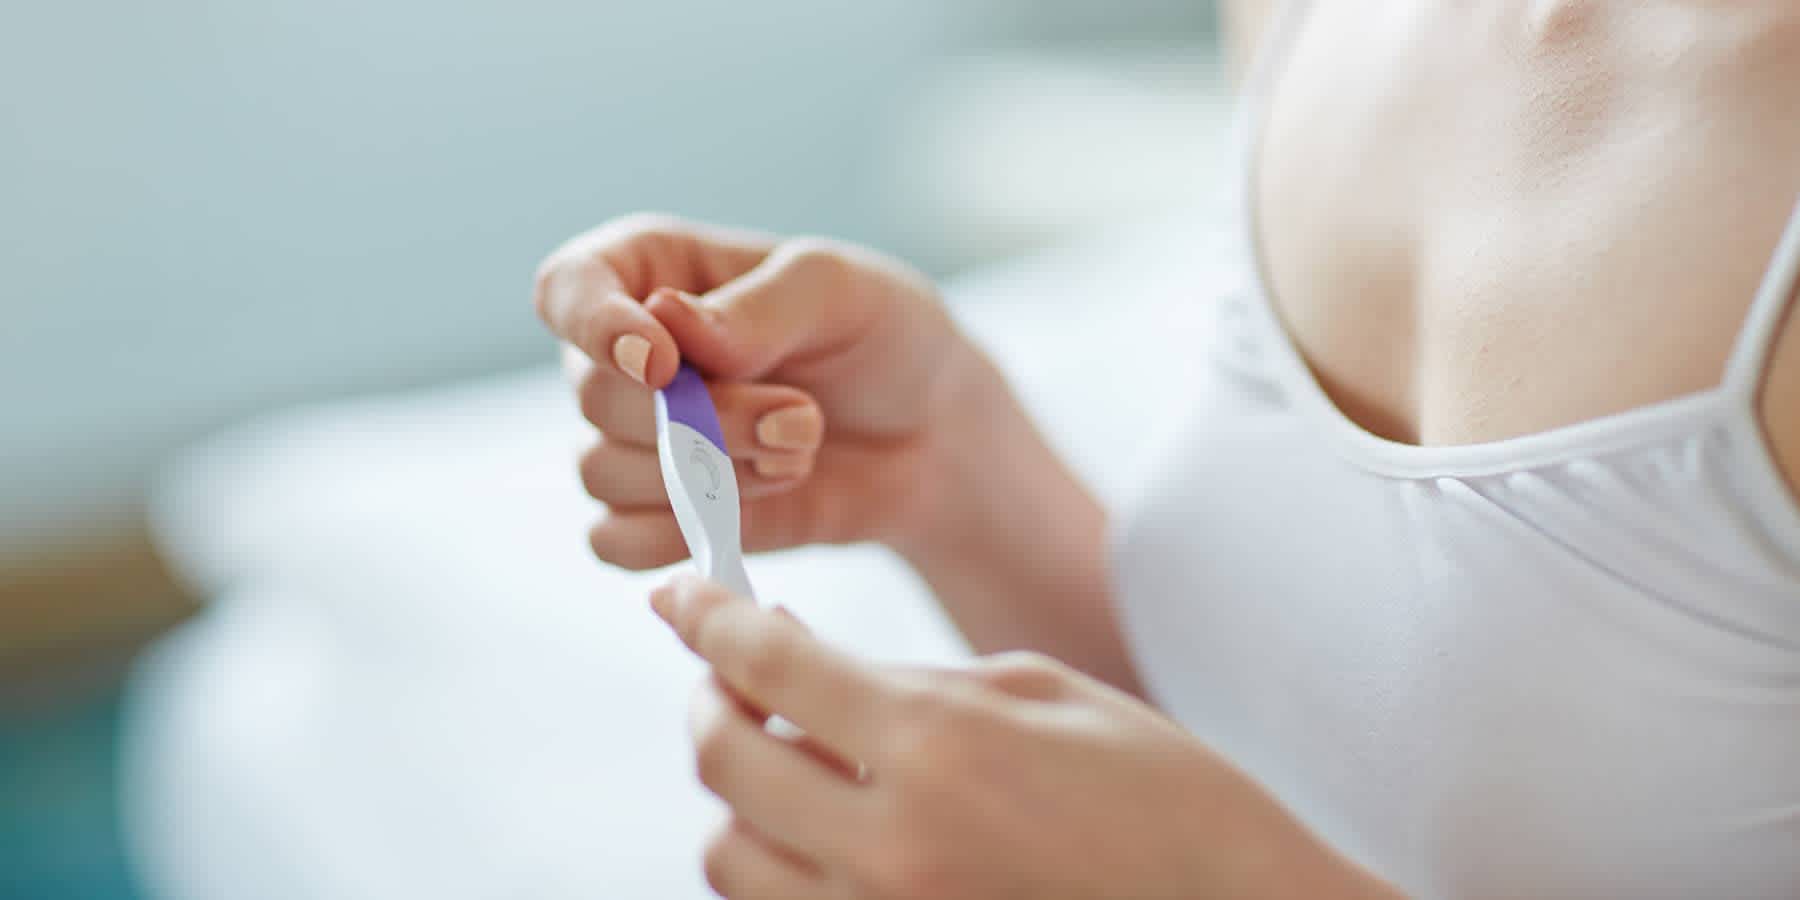 Woman looking at a pregnancy test after testing fertility hormones at home